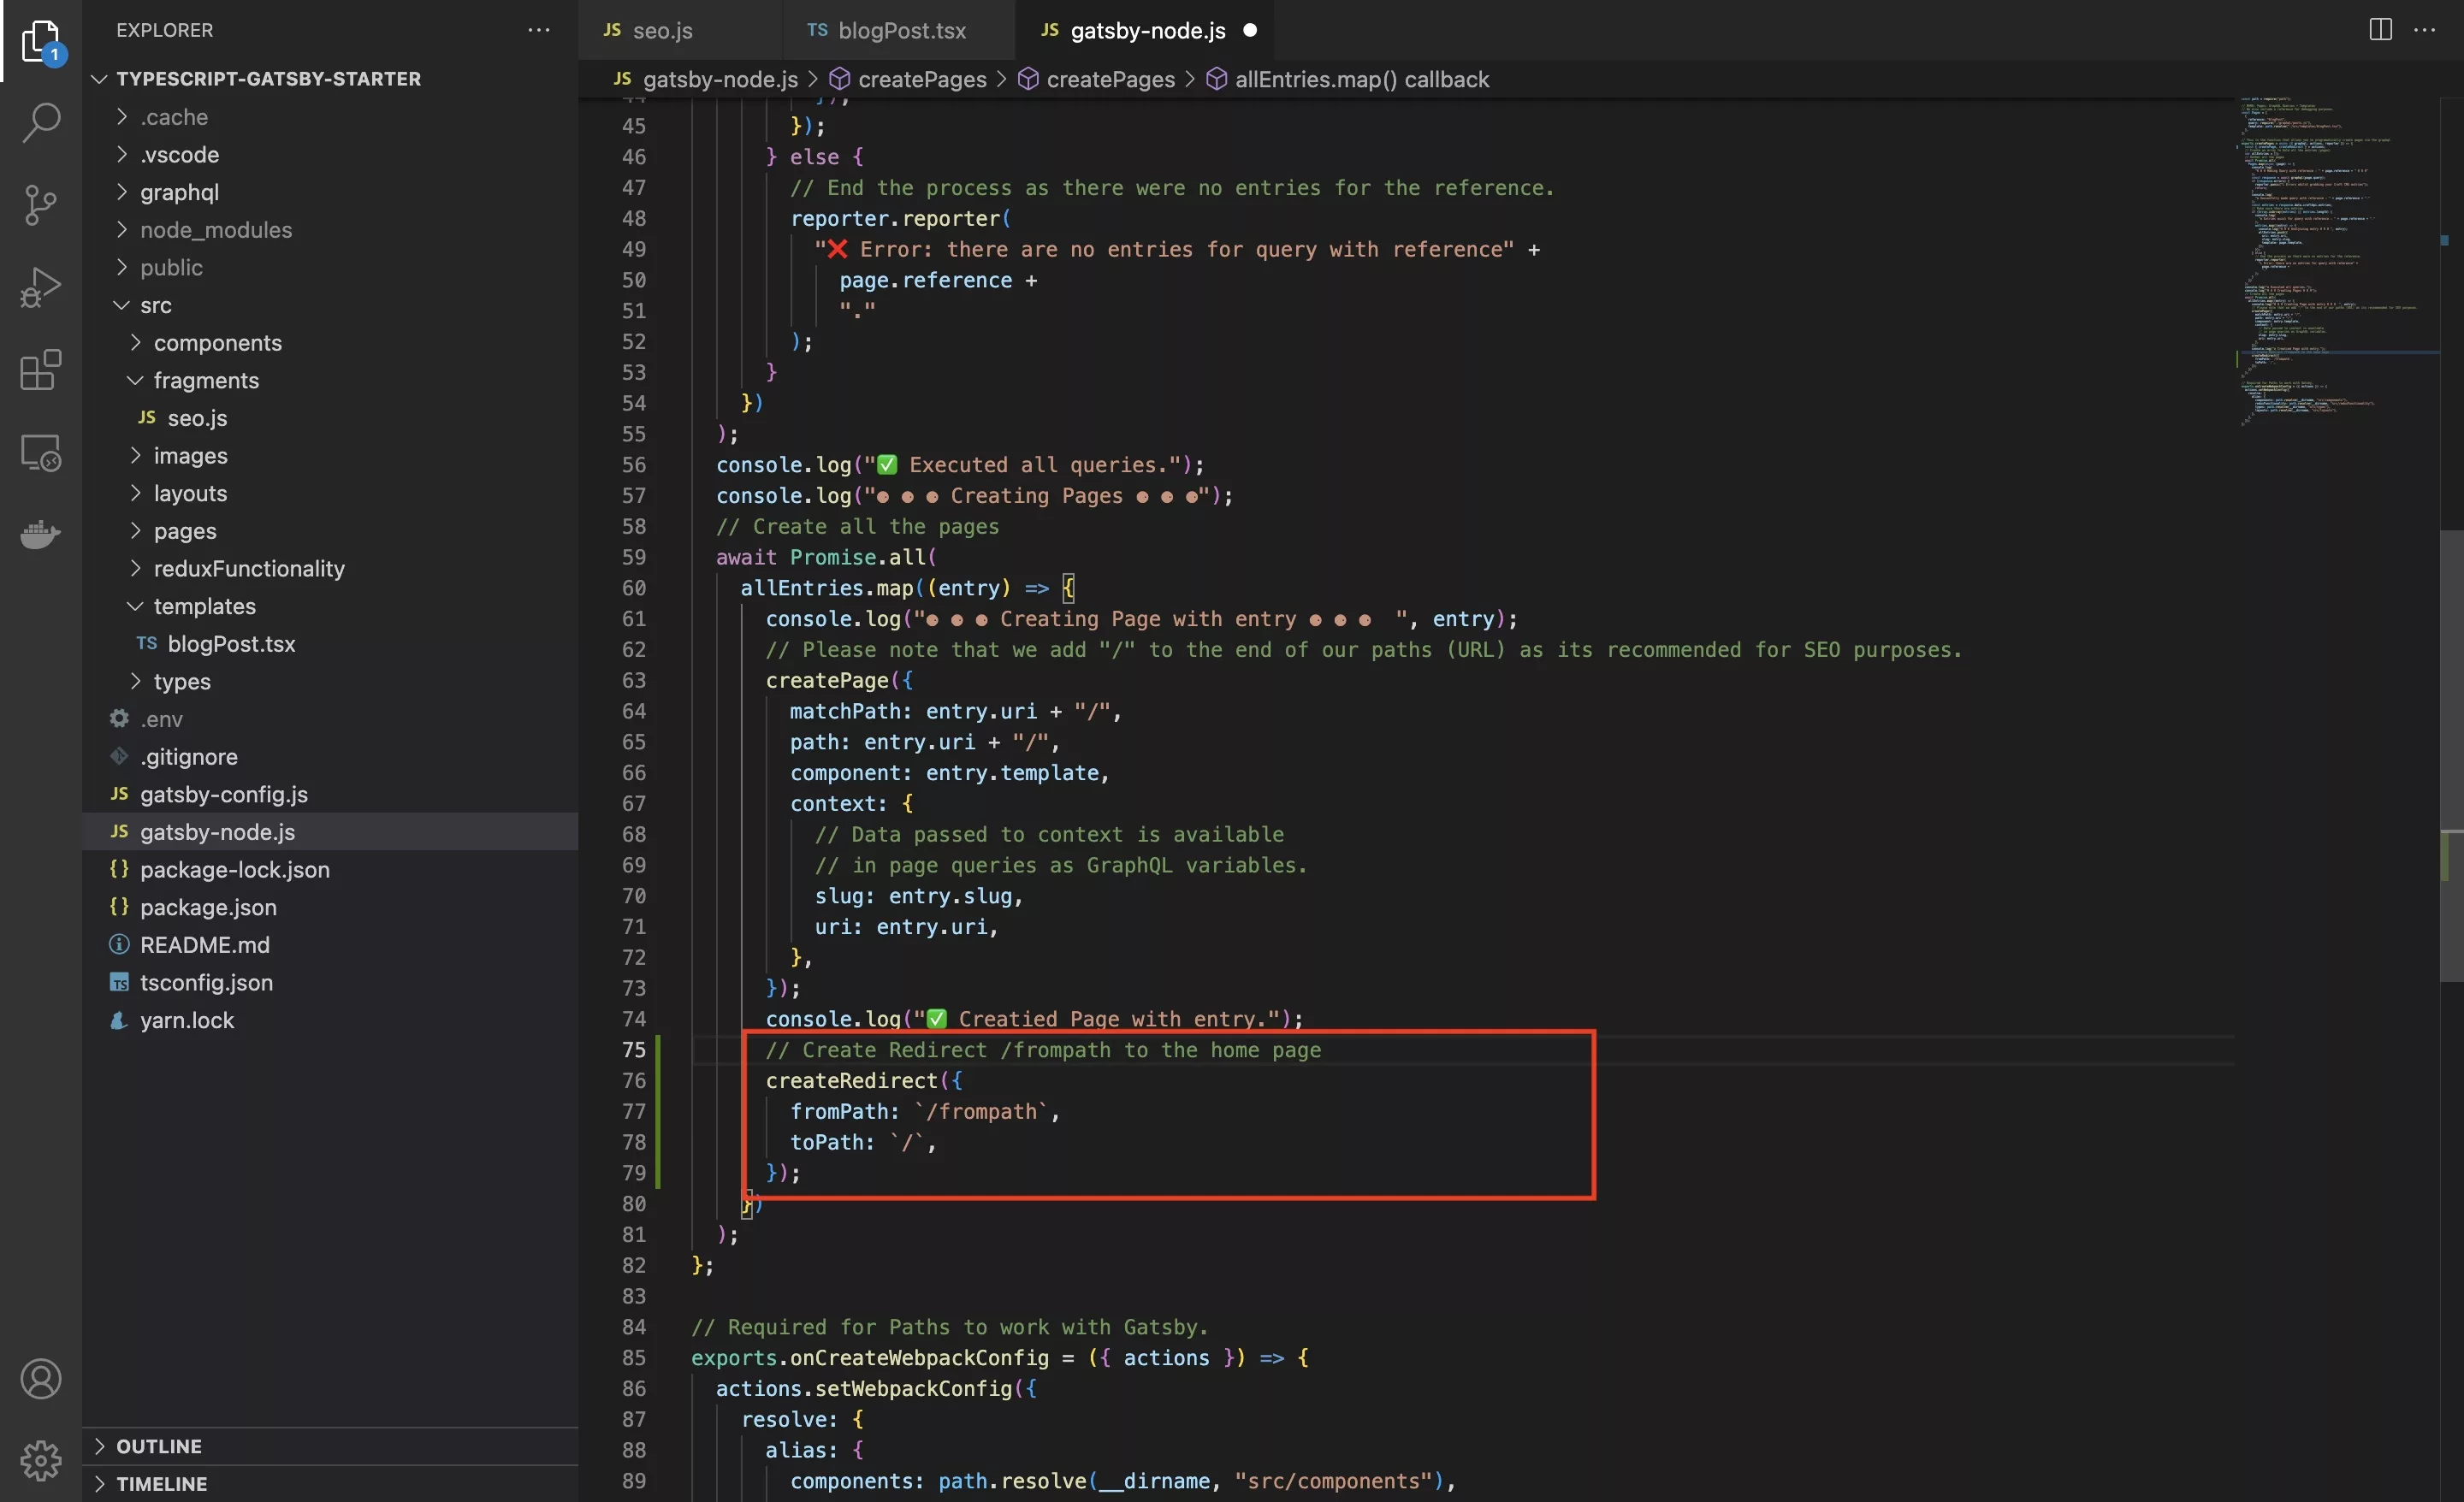 A screenshot of VSCode showing you how to create a redirect within the createPages function of the gatsby-node.js script.